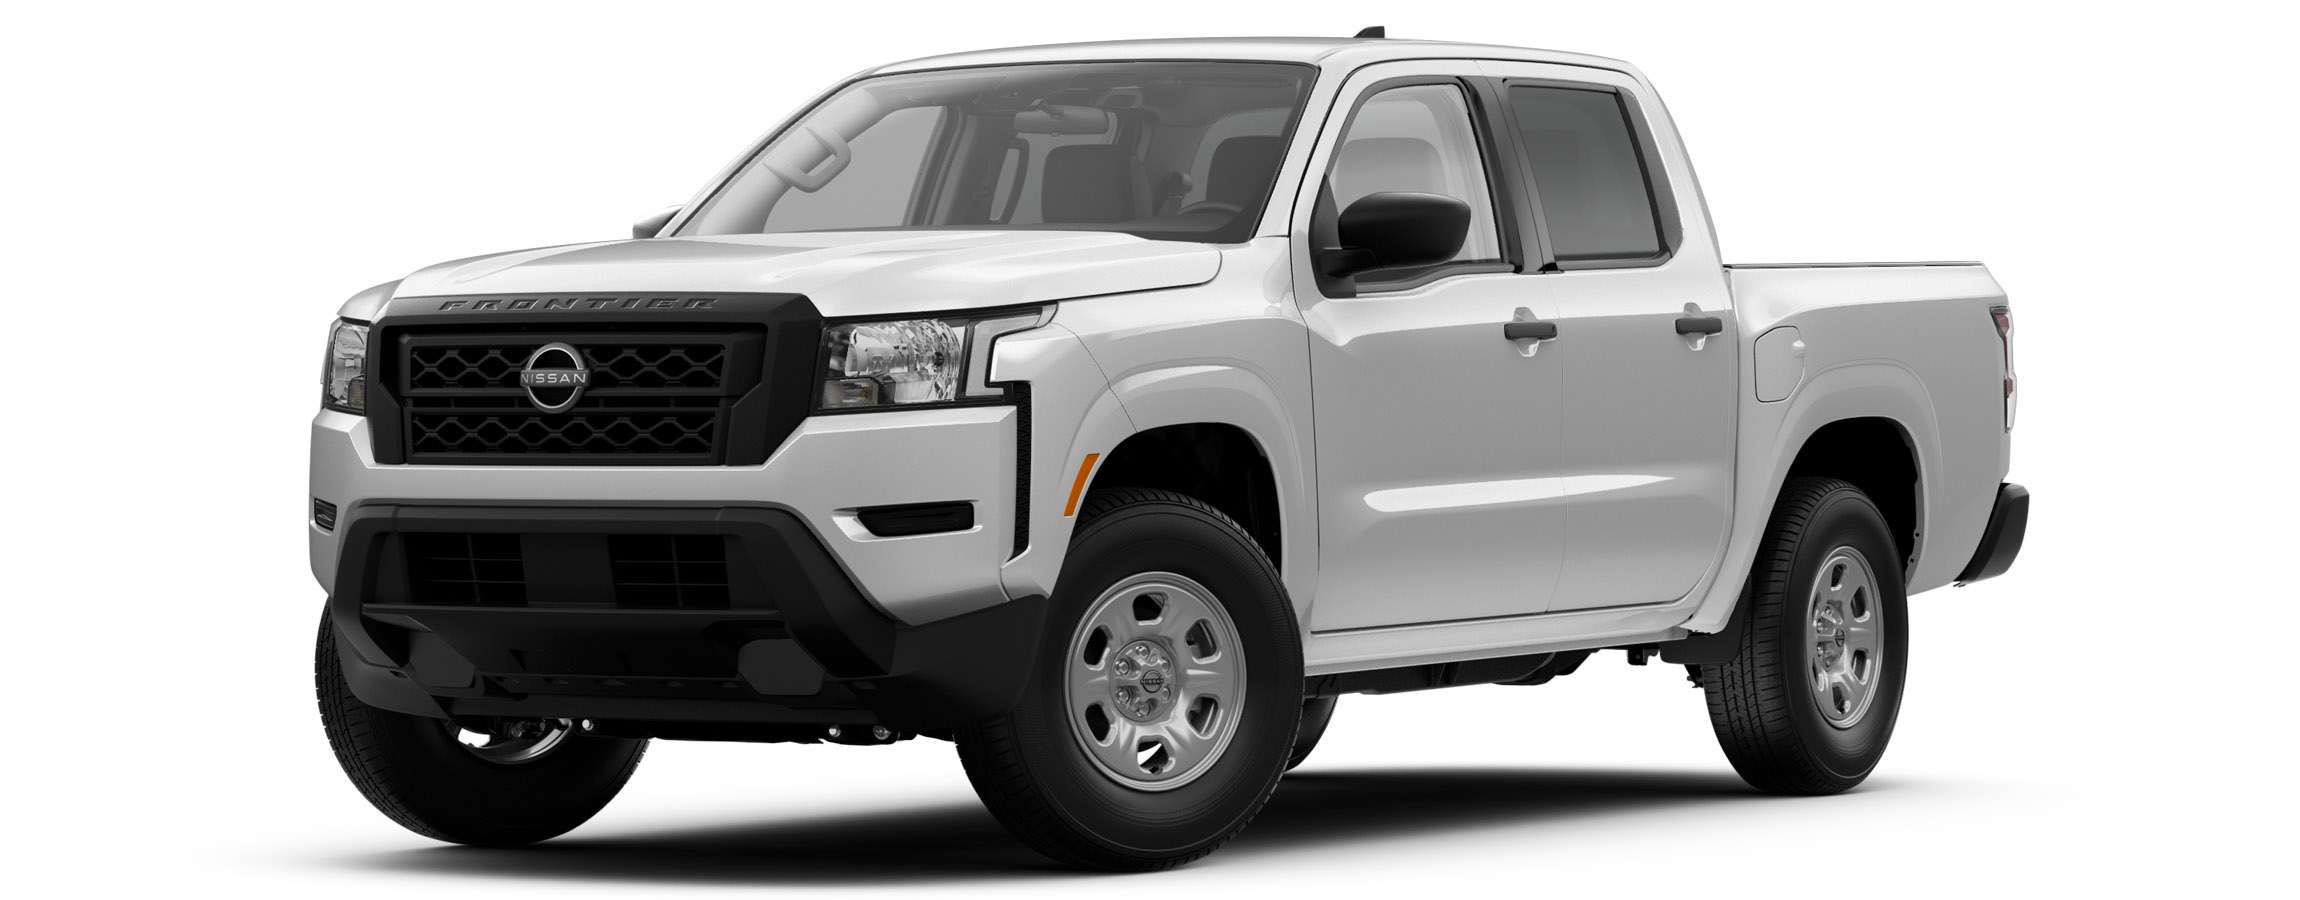 Lease your new 2024 Nissan Frontier today!